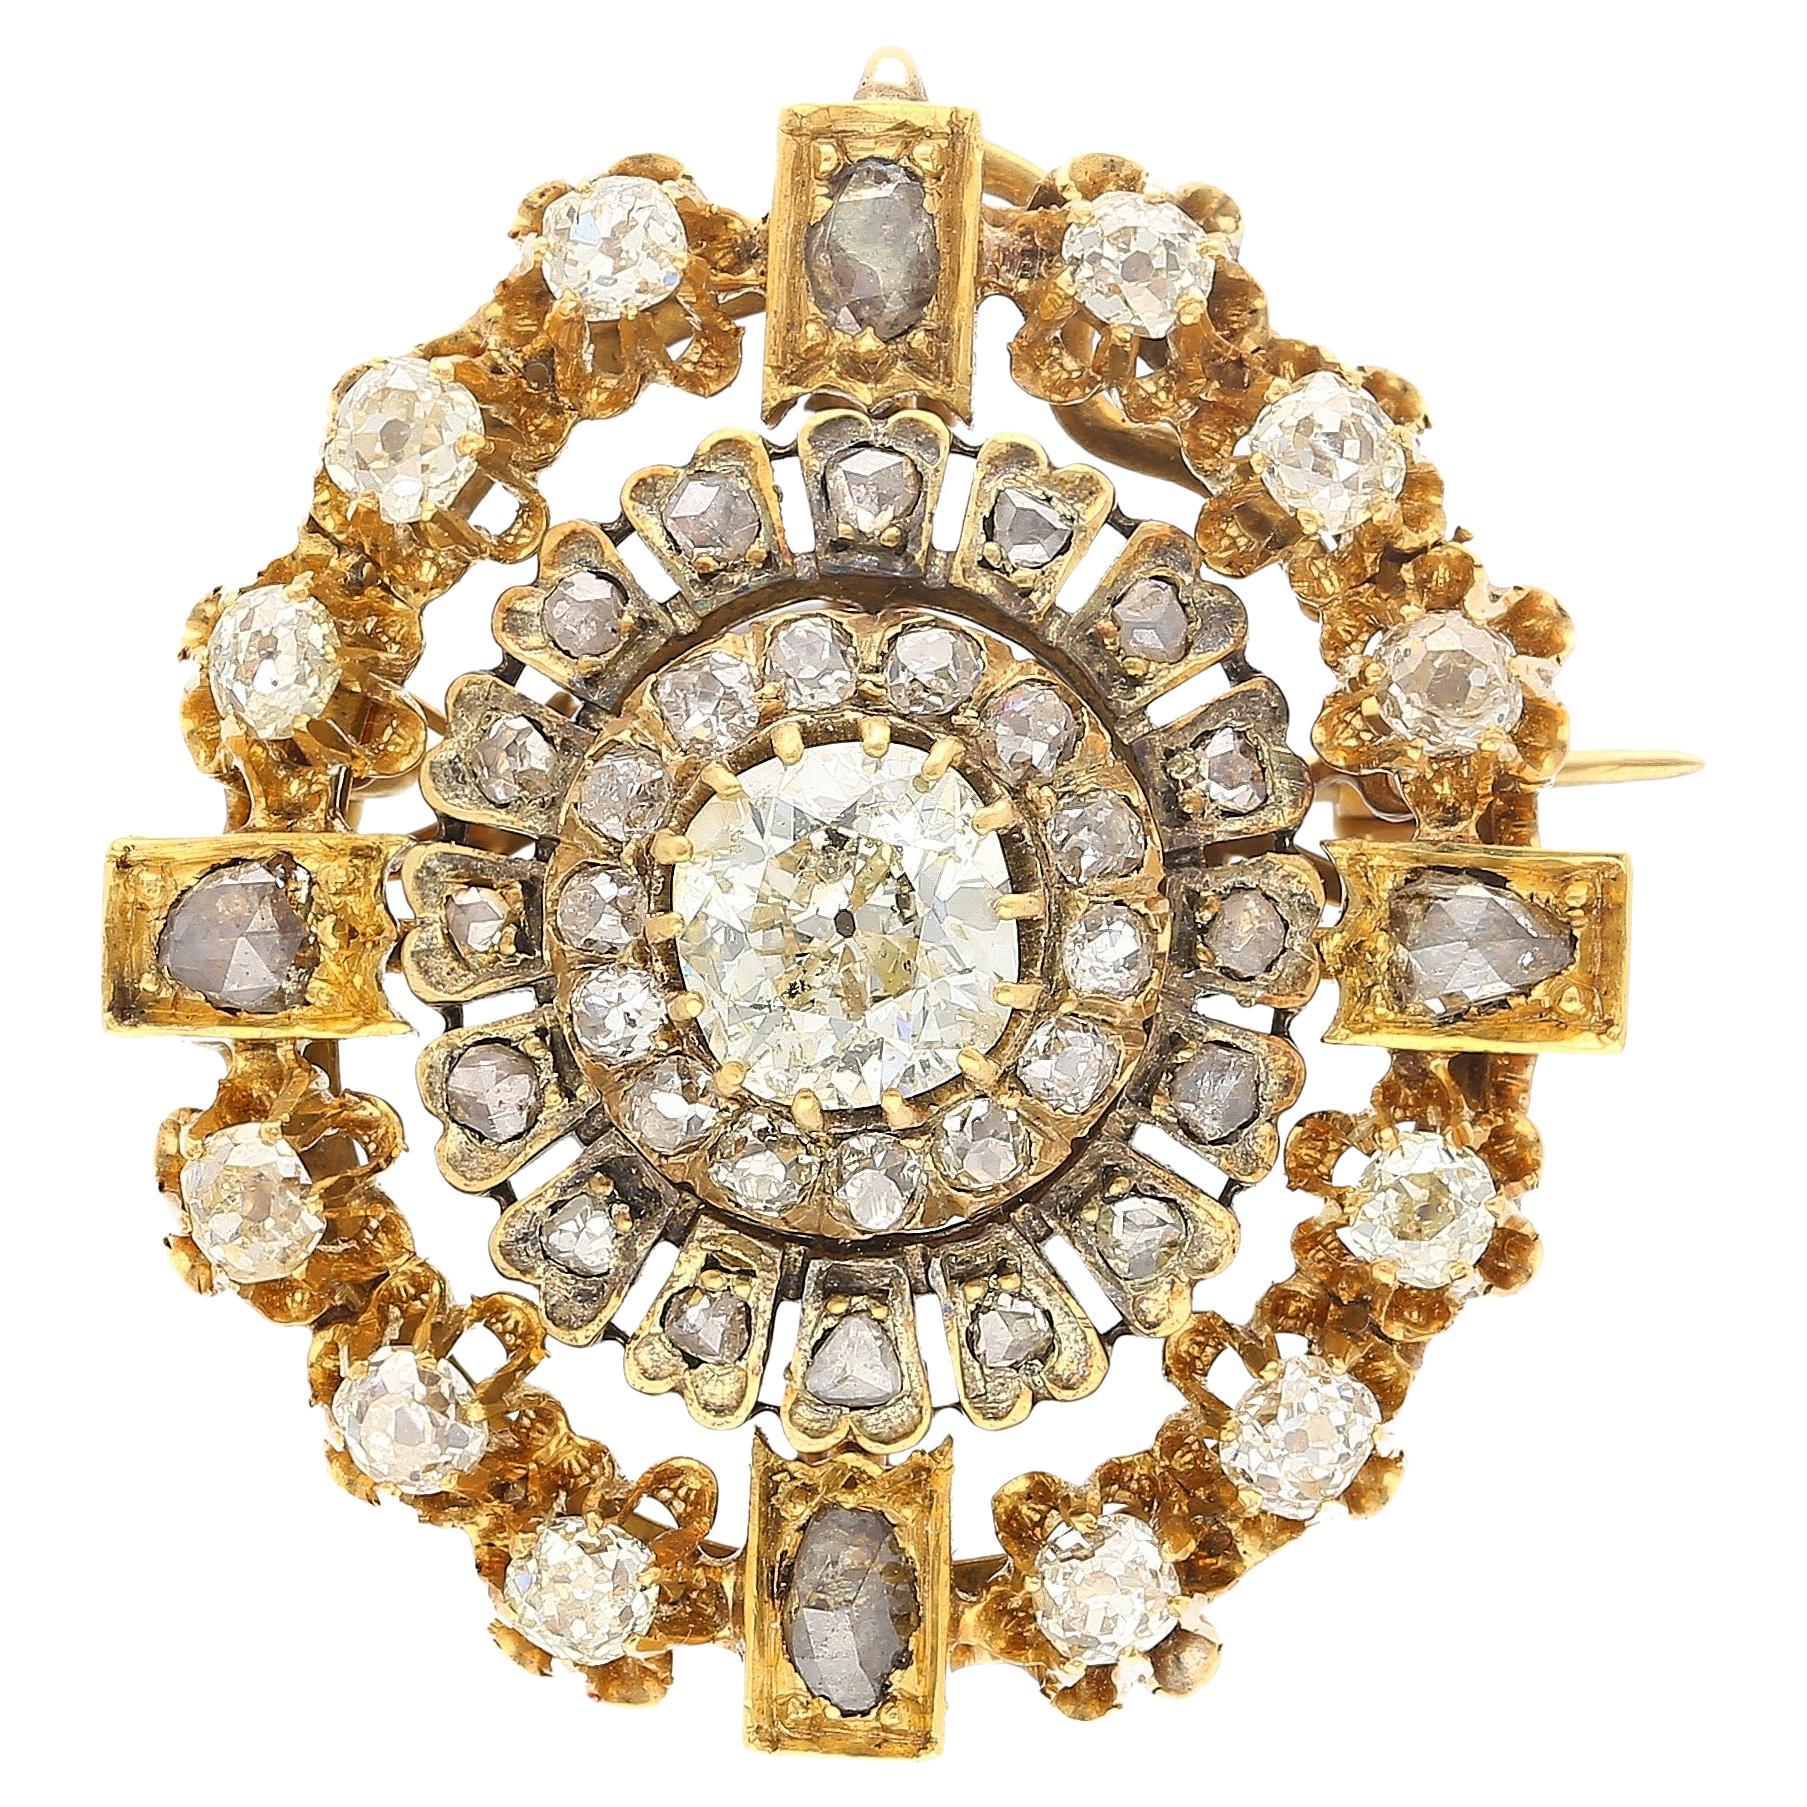 Antique Victorian Late 1800s 6.72 Carat Total Mixed Old Euro Cut Diamond Brooch For Sale